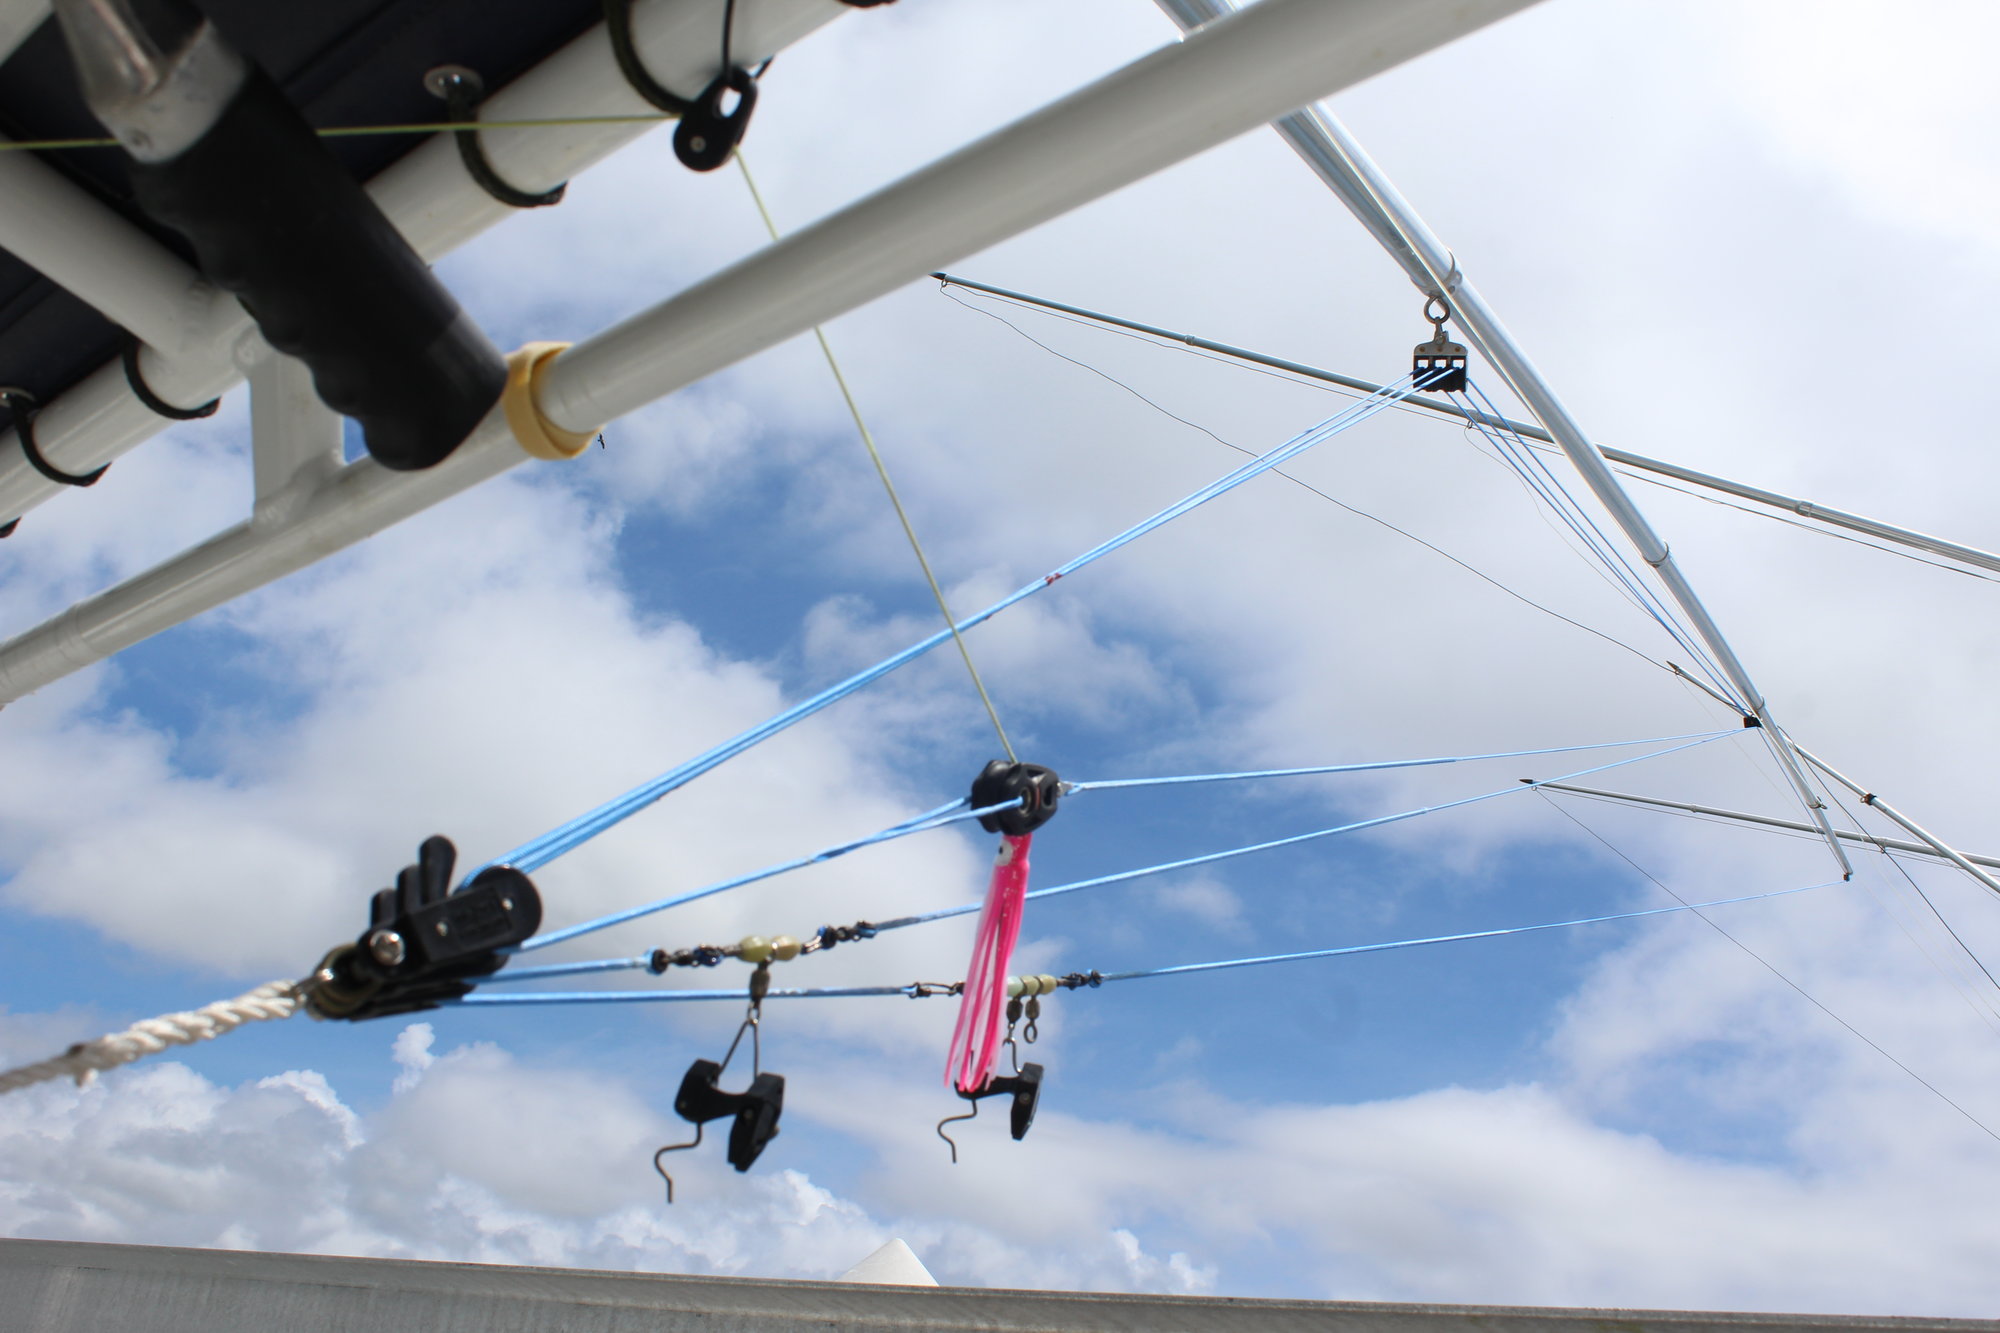 Fishing gear rigging help/advice - The Hull Truth - Boating and